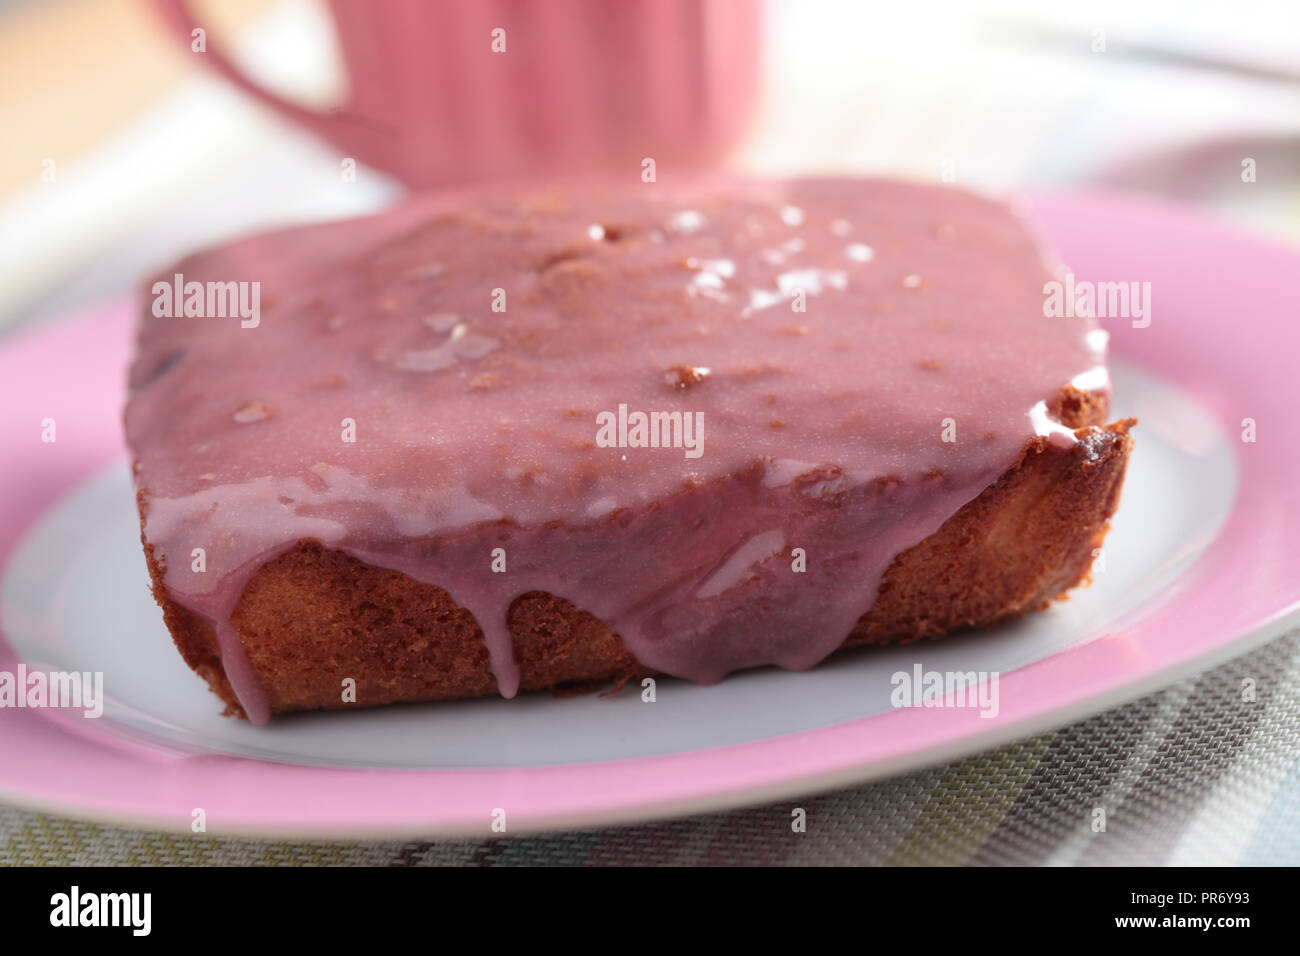 Homemade cake with frut topping on a plate Stock Photo